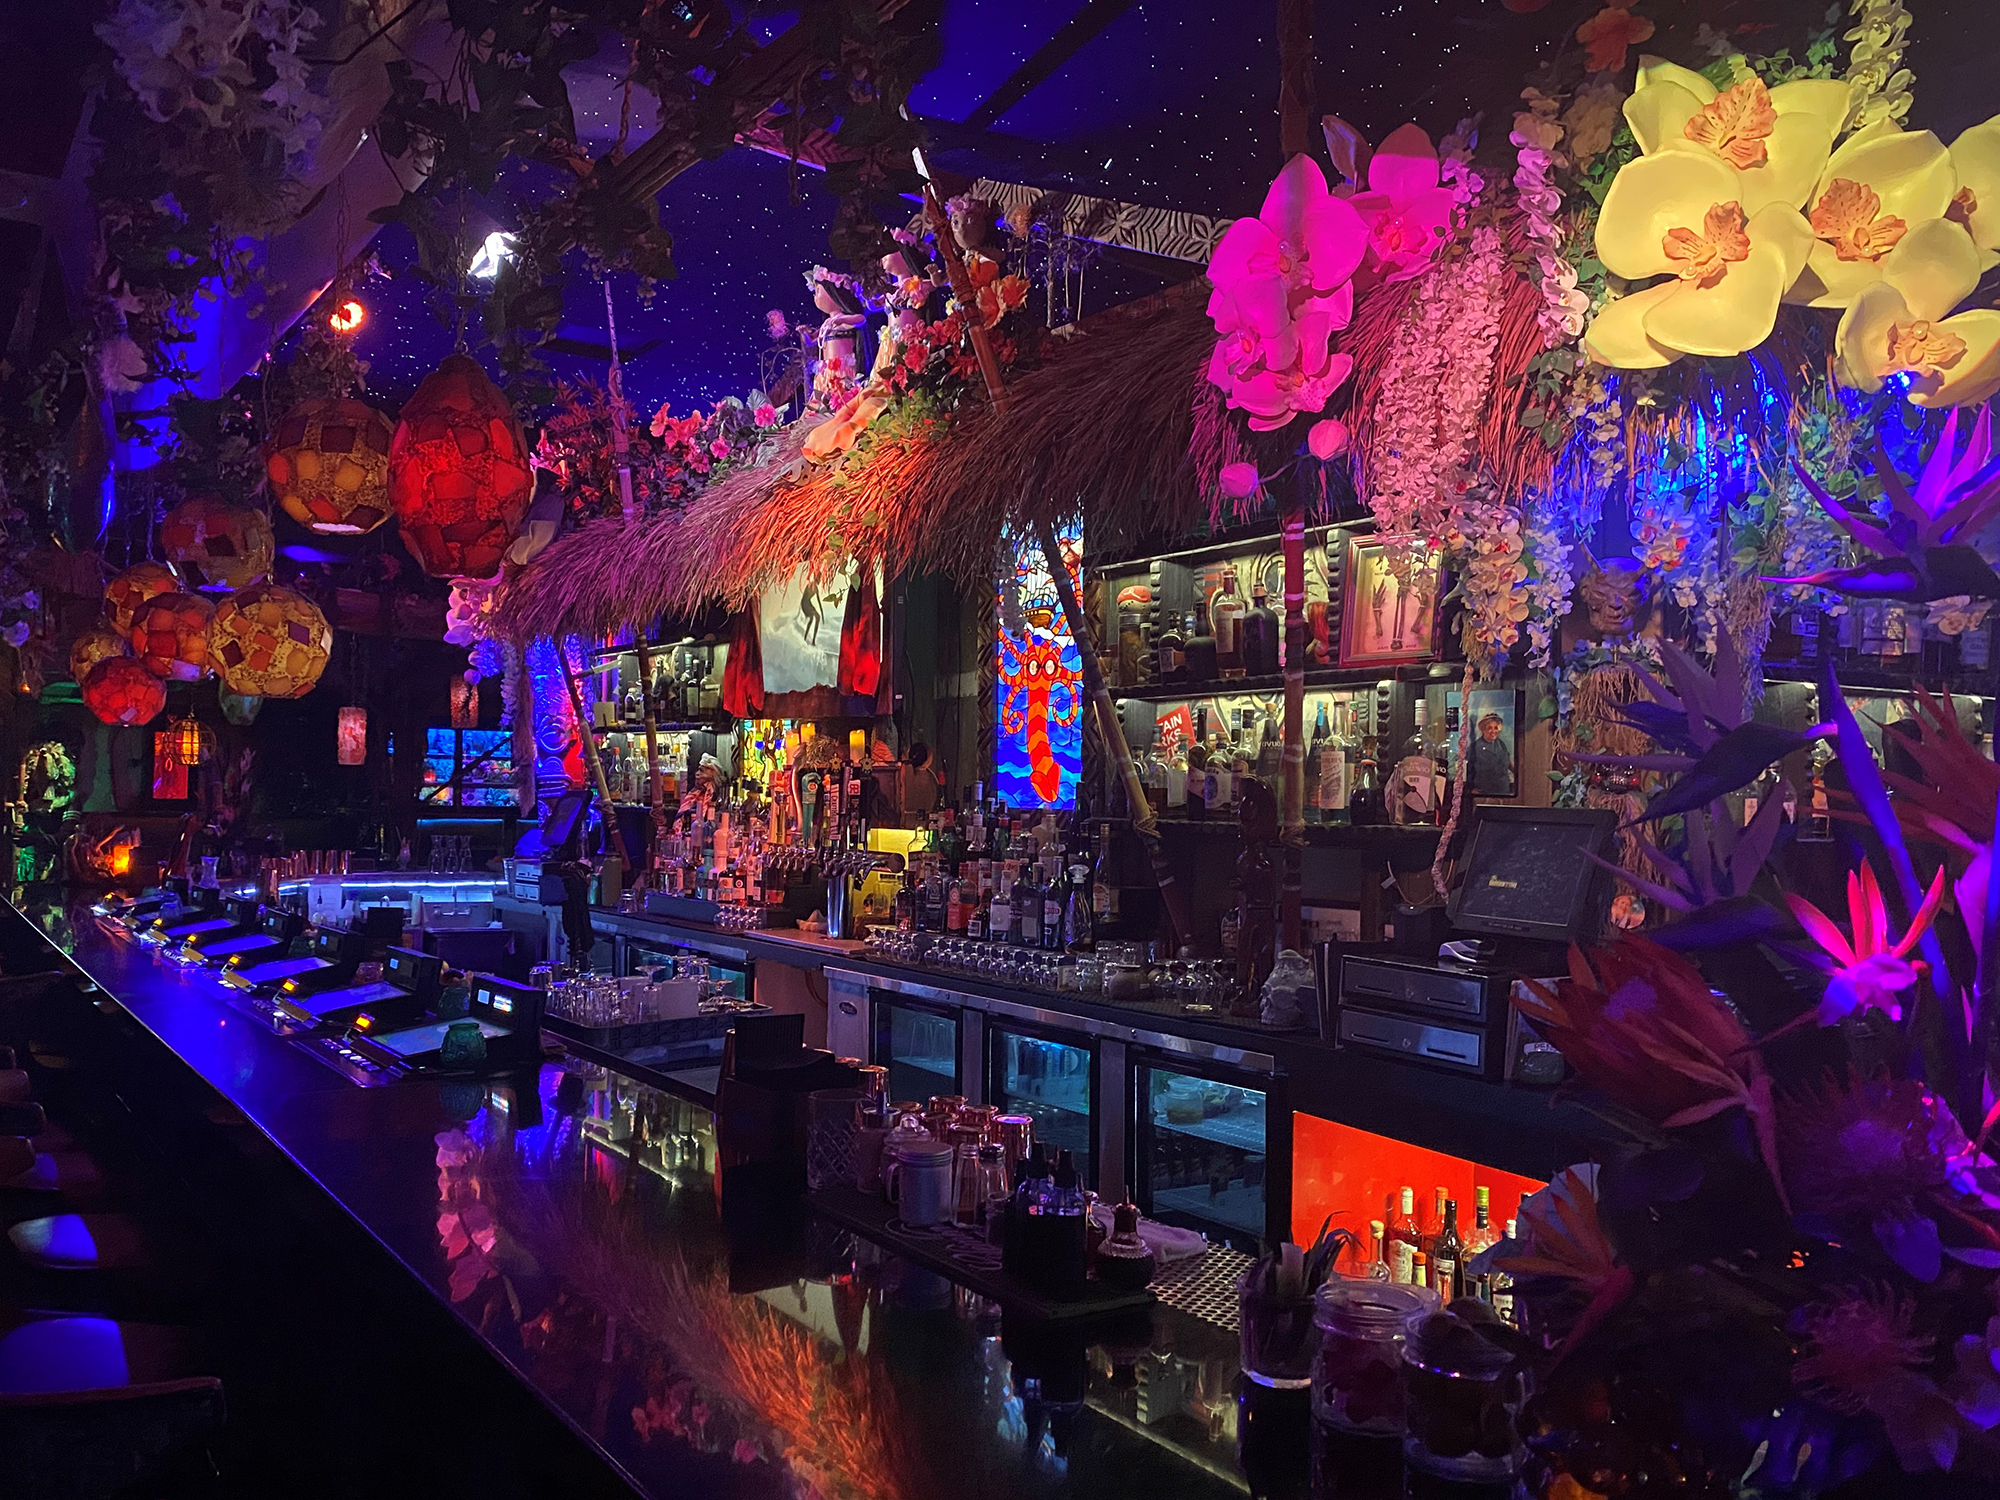 A colorfully lit tiki bar with many flowers and decorations